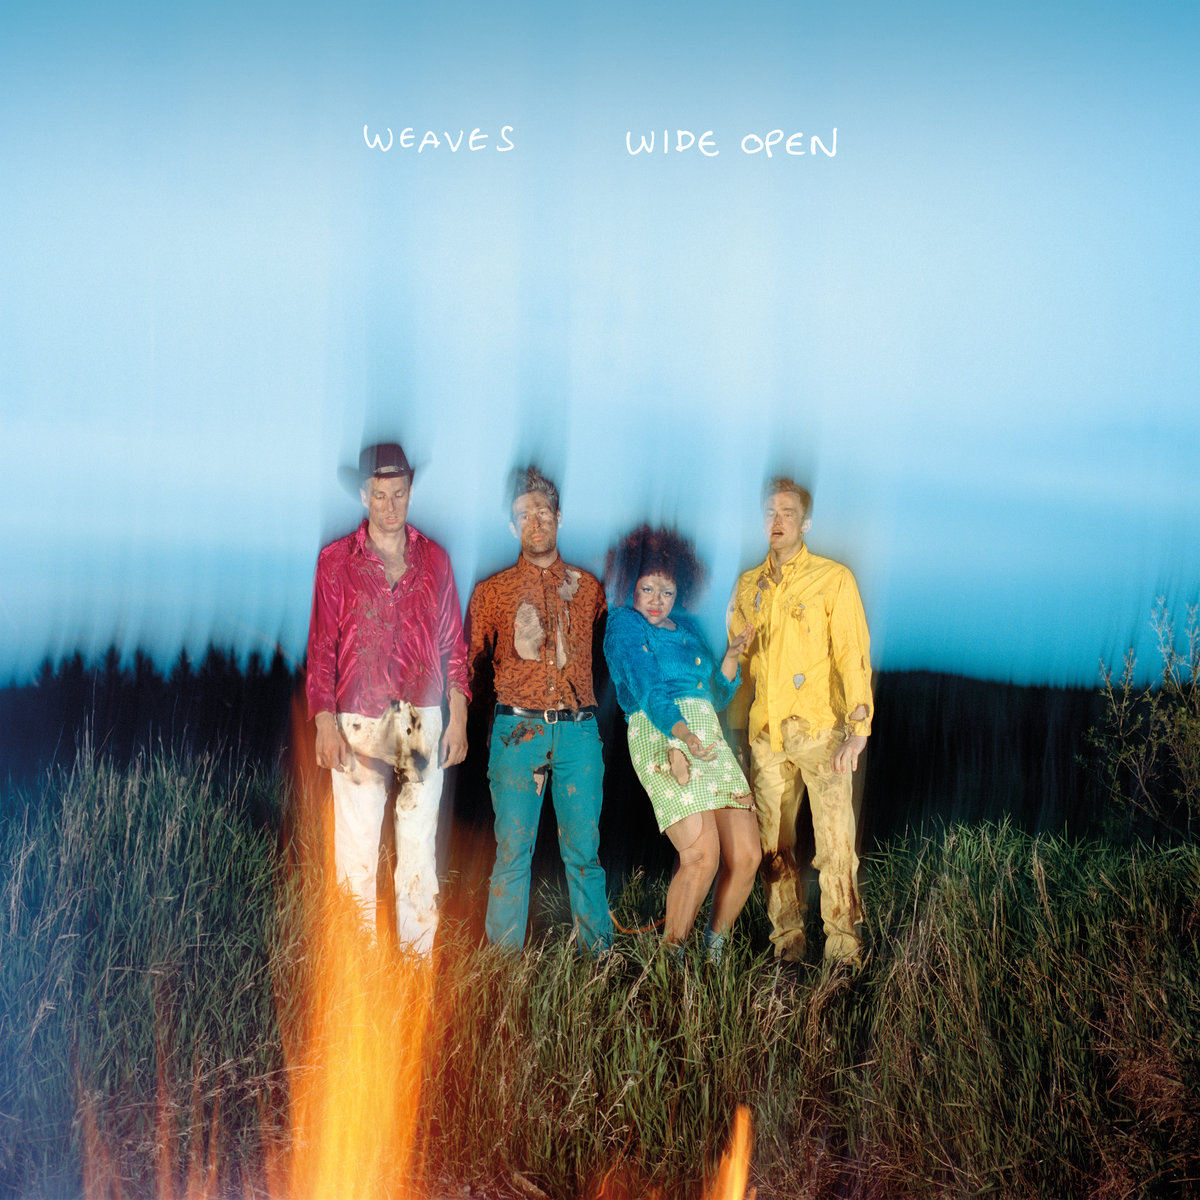 Our review of 'Wide Open' finds Weaves nailing pop without losing their abrasive edges.